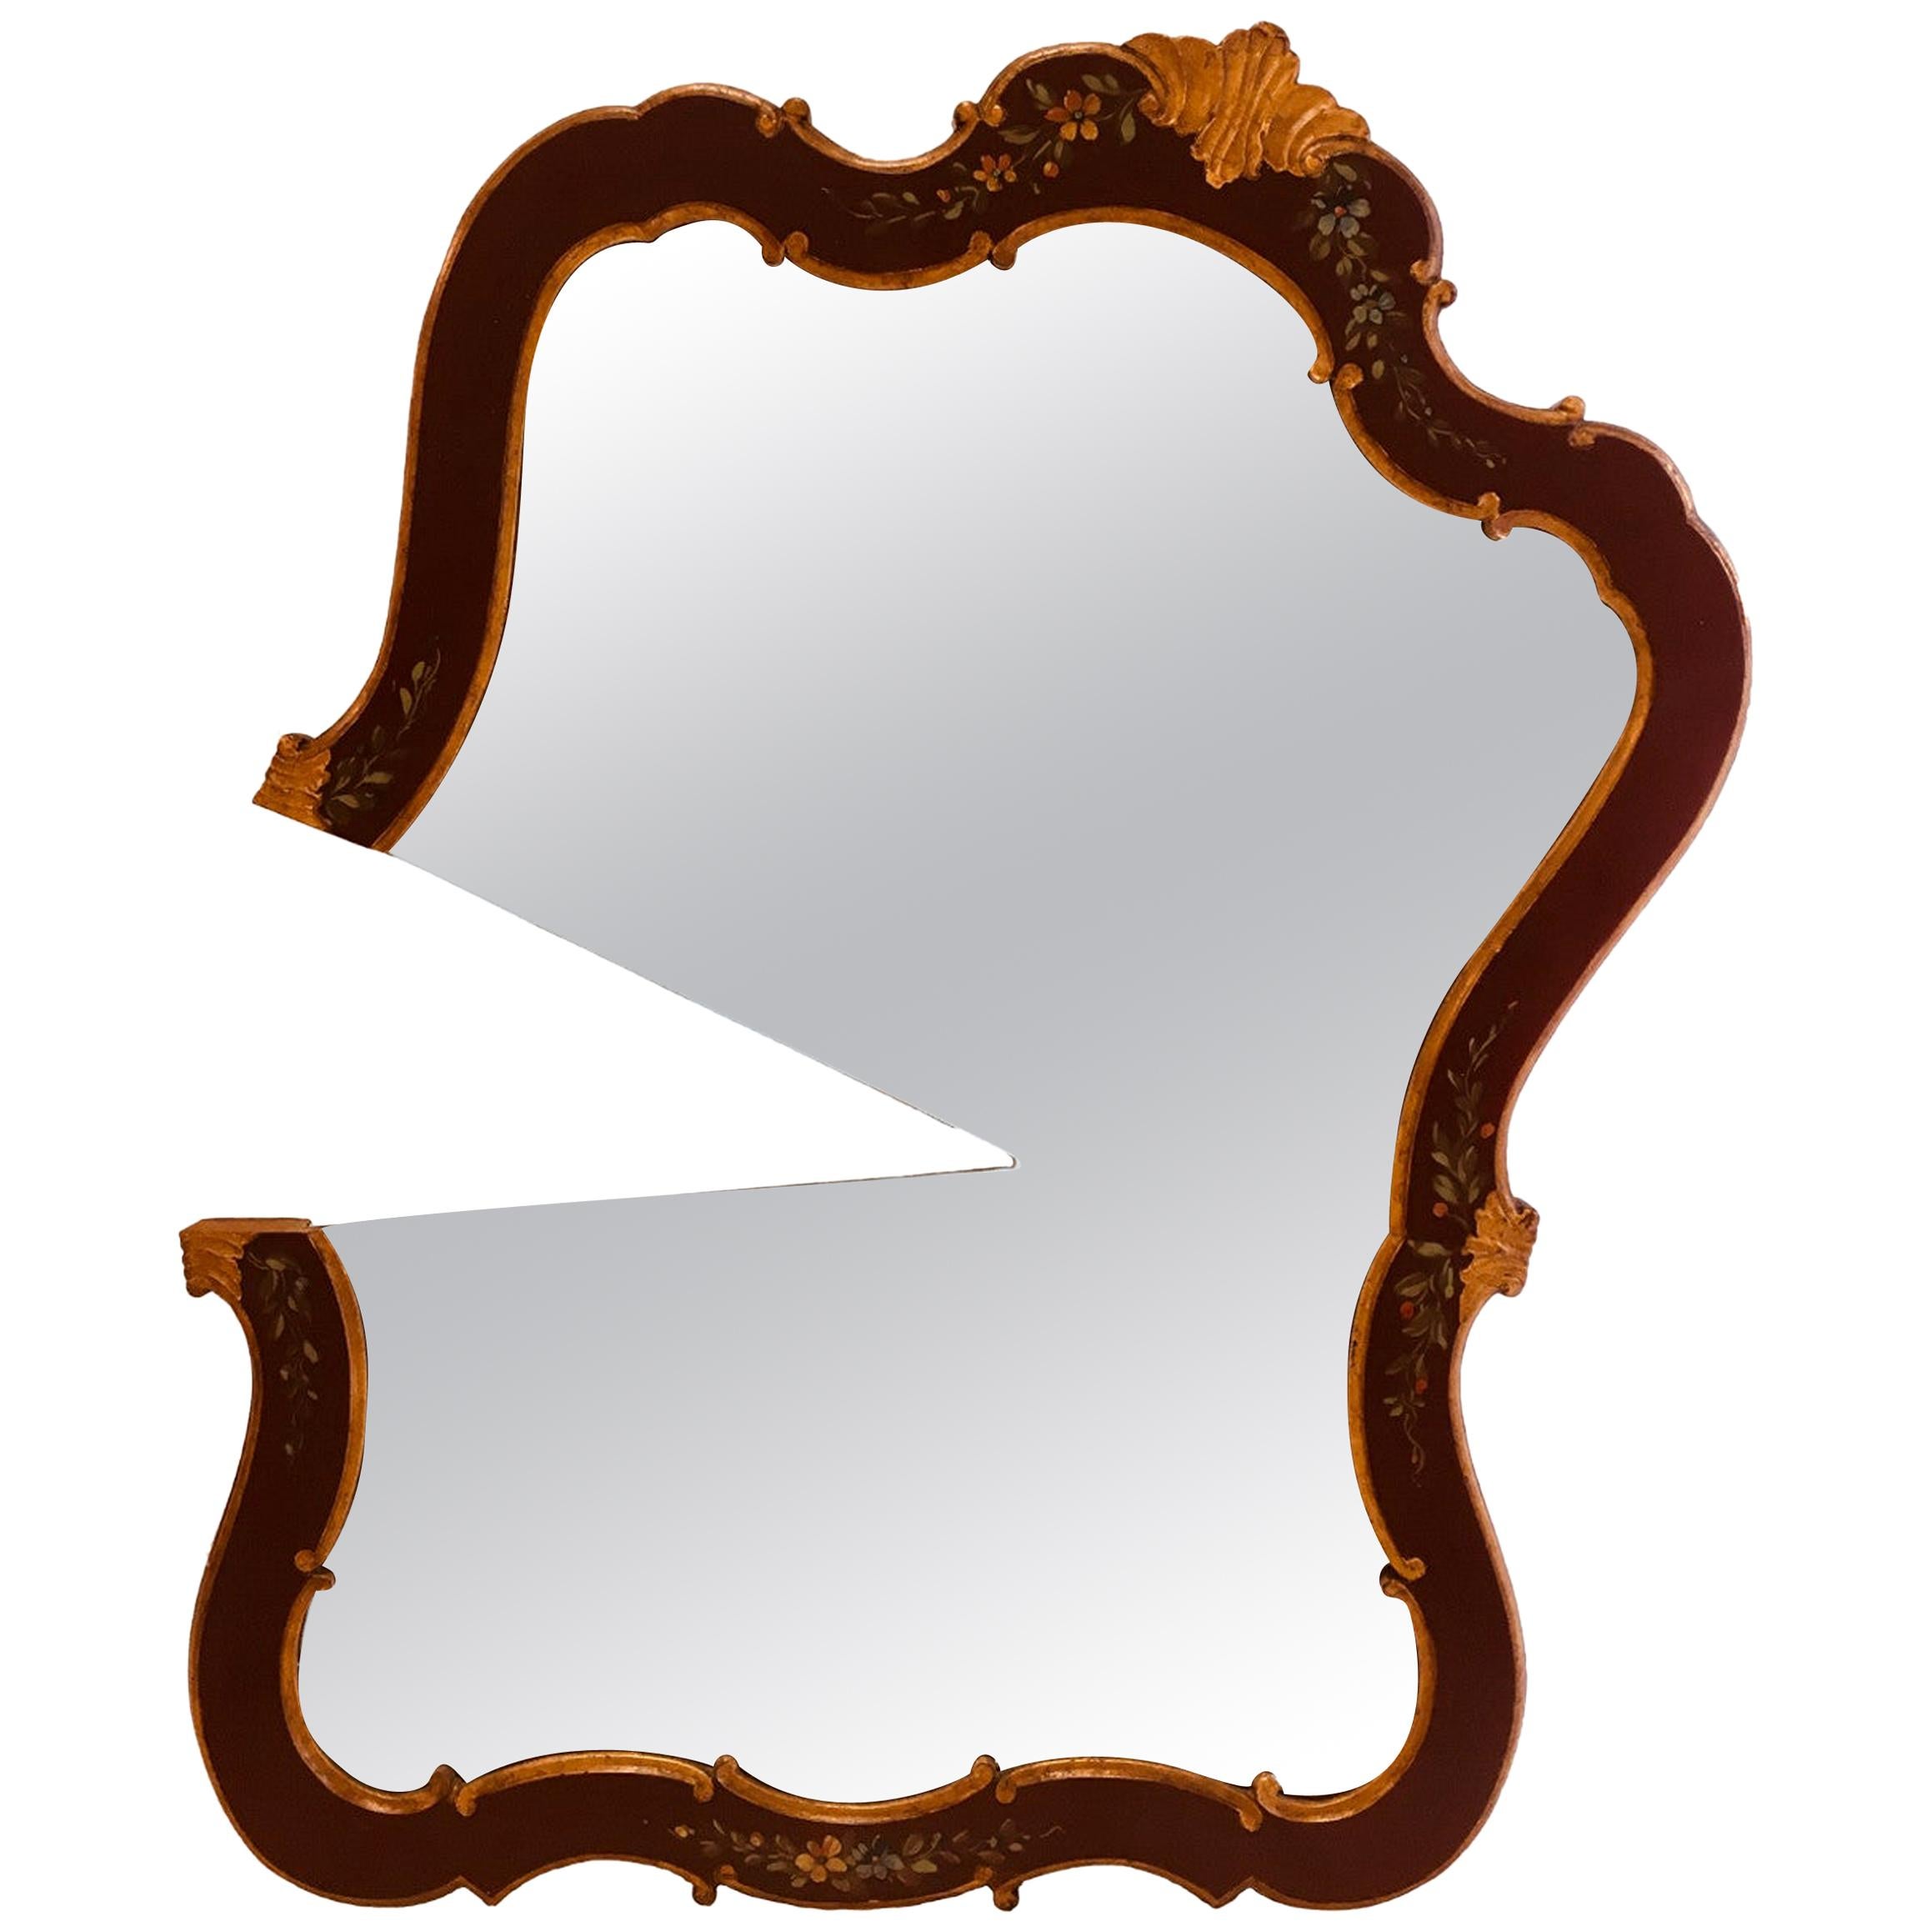 "Pacman" Contemporary Wall Mirror from an Antique Venetian Lacquered Frame im Angebot